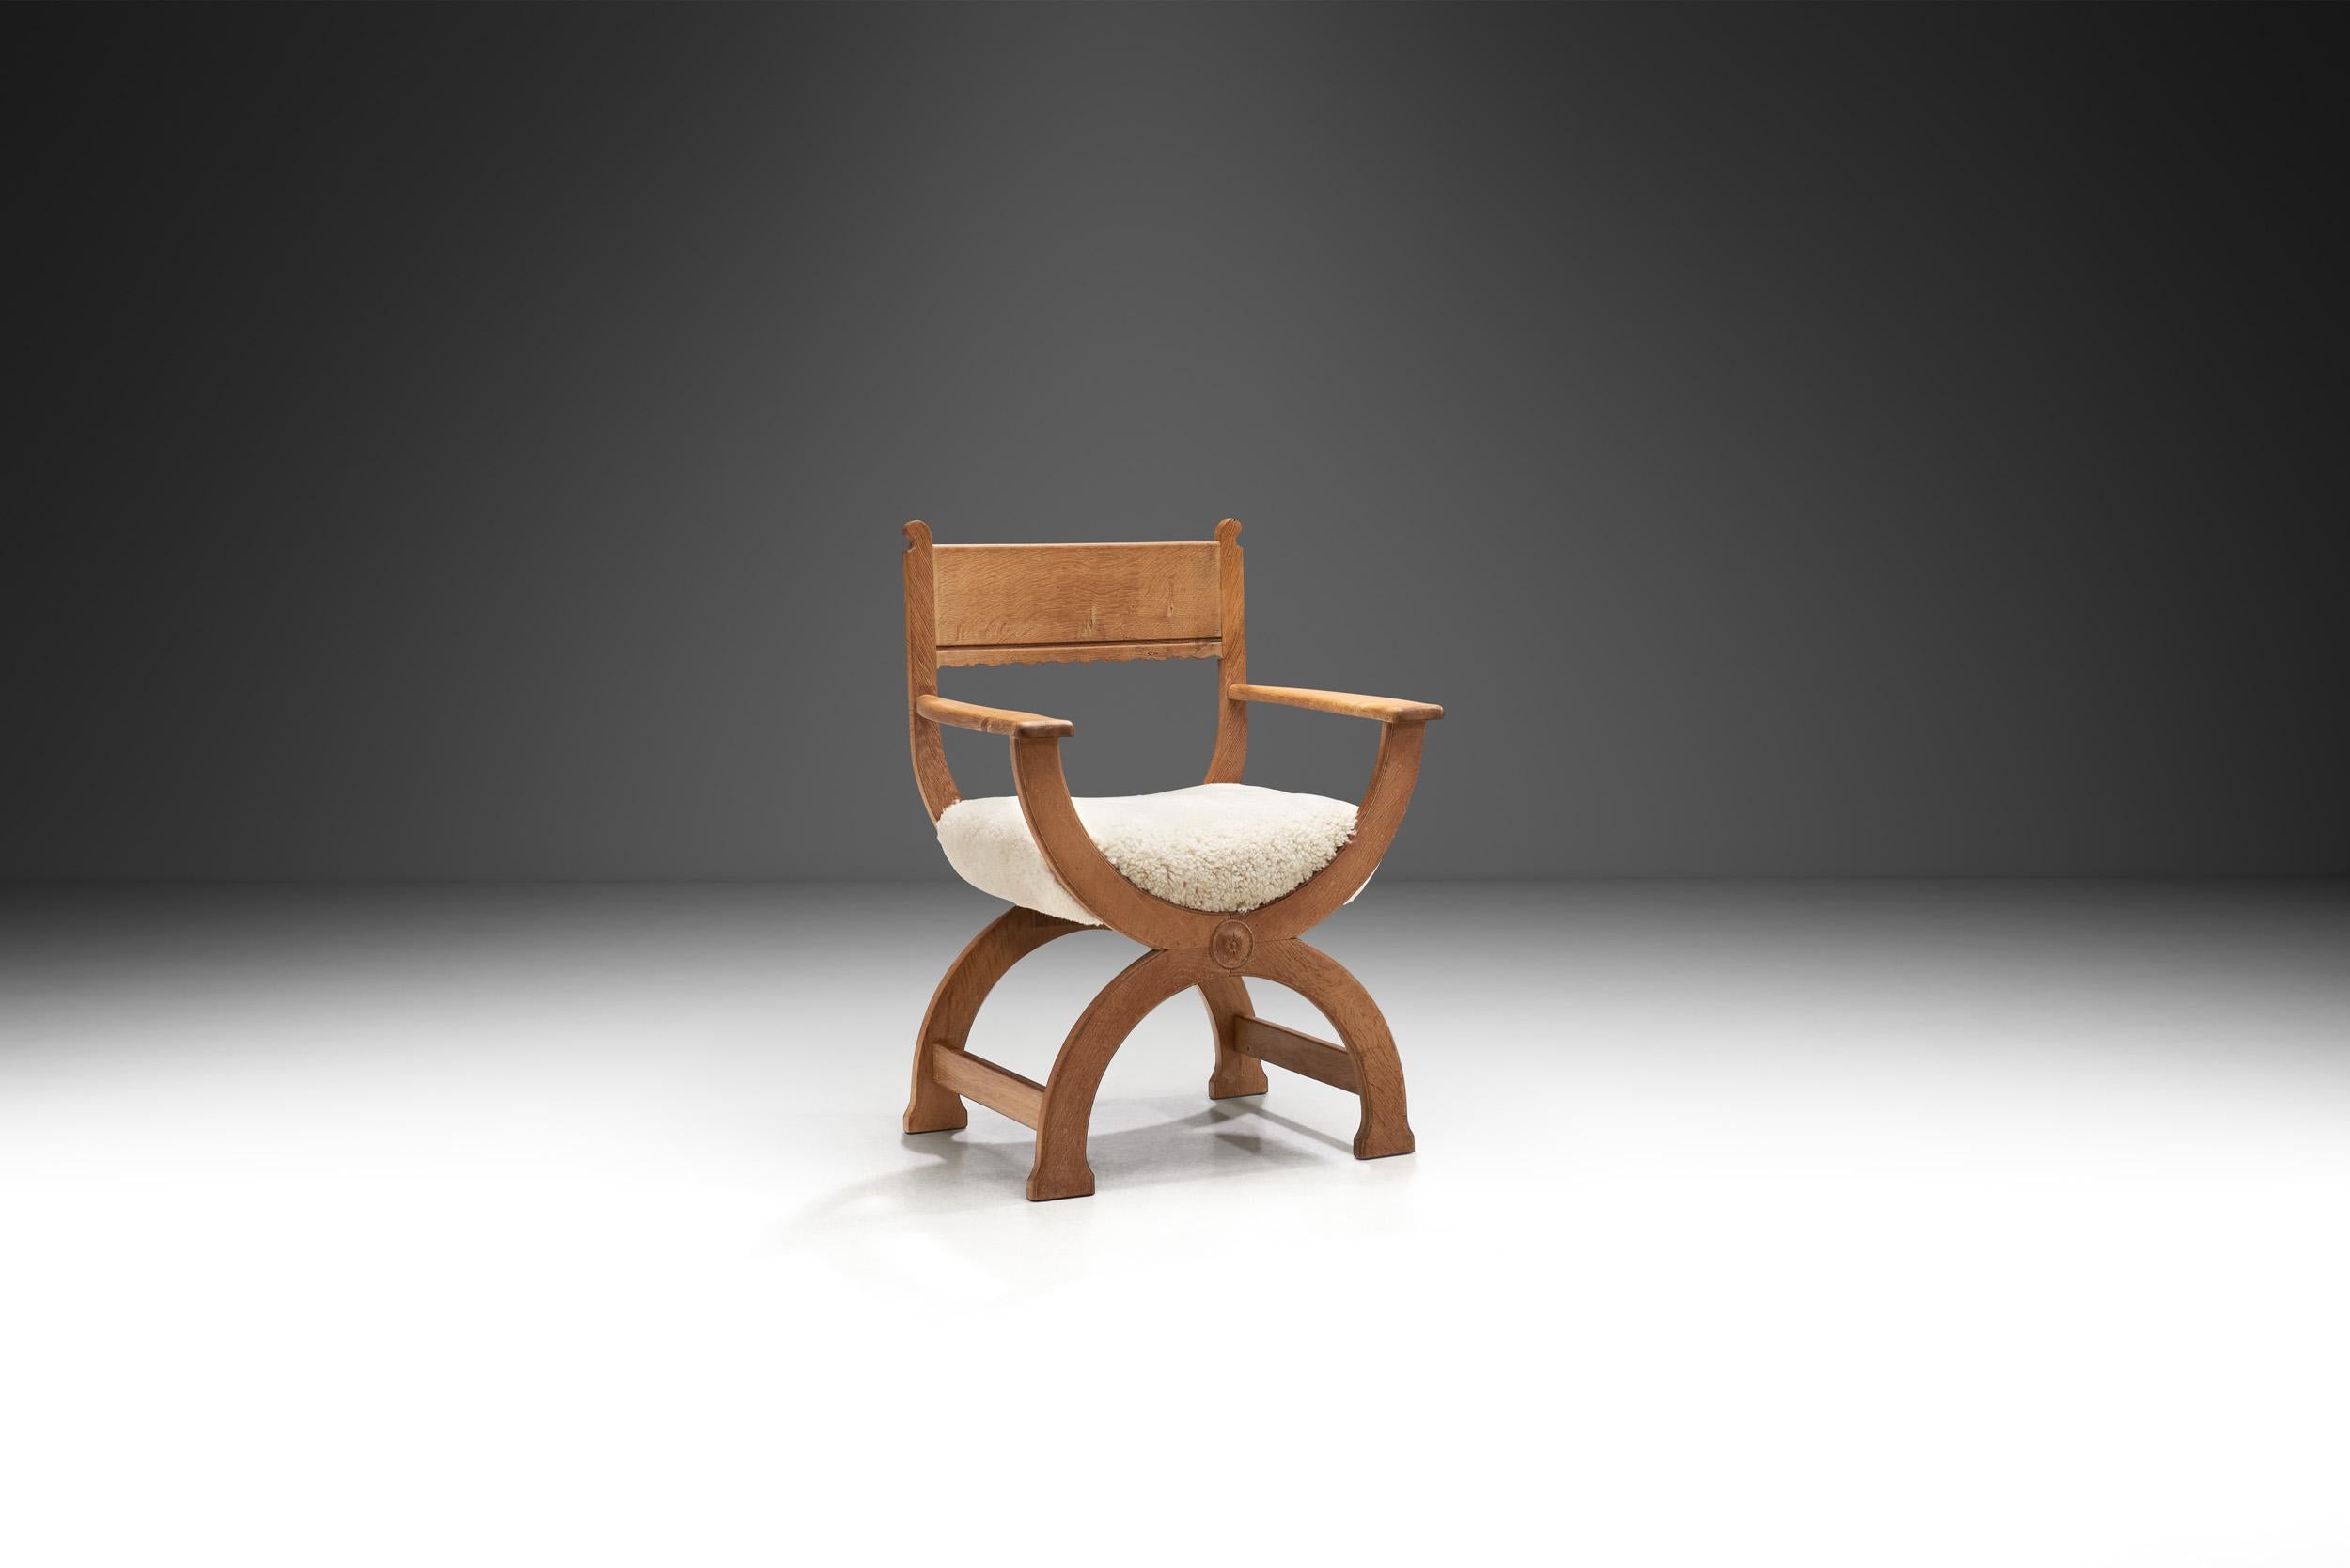 This so-called “kurulstol” or kurul chair, is an iconic model by Danish designer, Henning Kjærnulf. The Kurul chair is an ancient folding chair, originally a folding stool with straight or curved legs. Among the Romans, in addition to being an